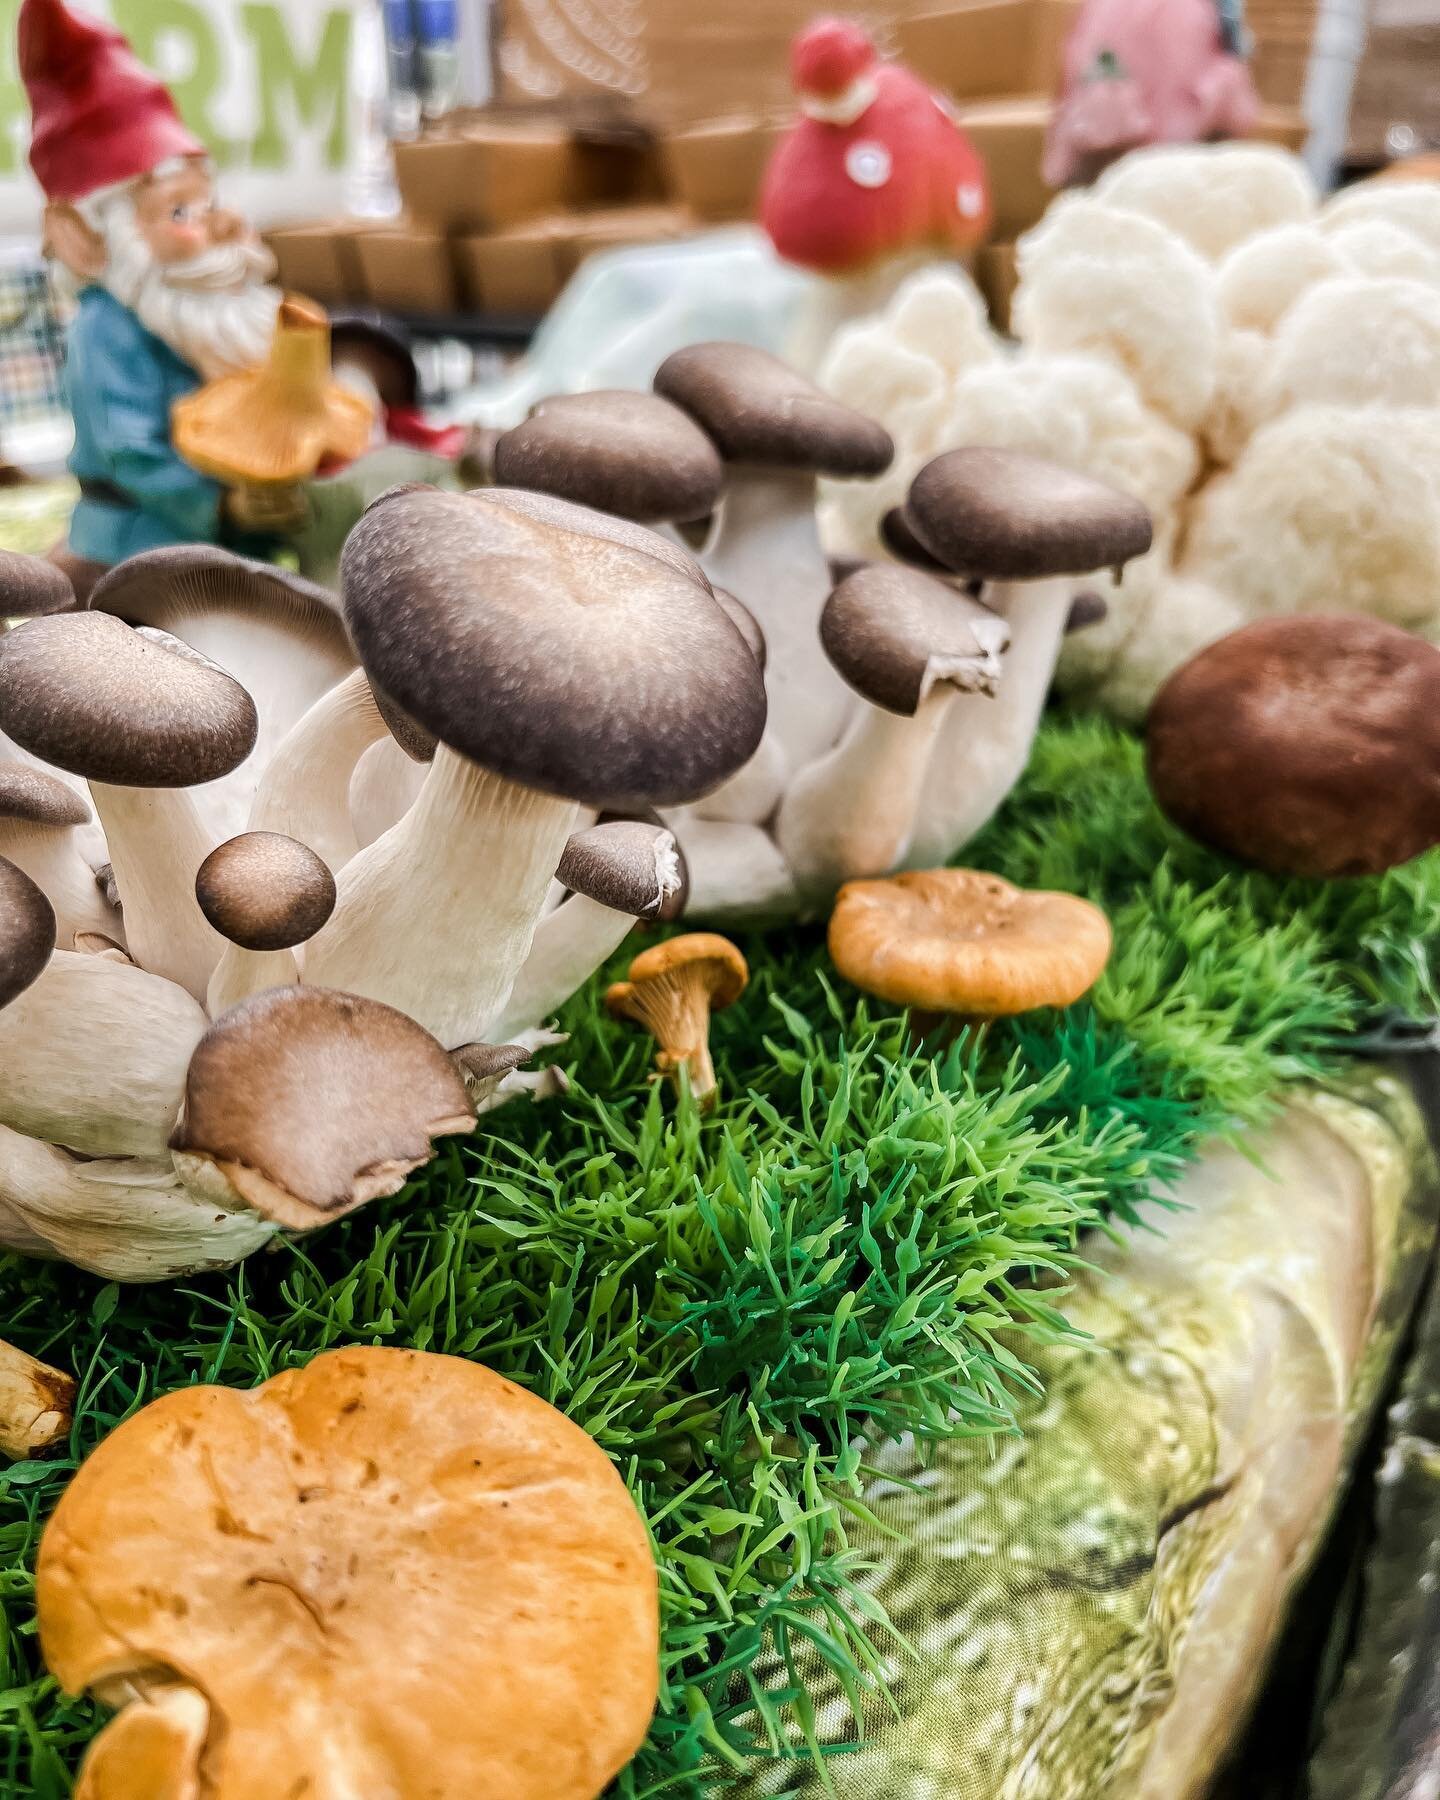 Happy Saturday! 🍄 

The sun is out, we&rsquo;ve got an amazing line-up of vendors including tons of food options, beautiful music and some fun kids (or kid at heart) crafts going on!

We&rsquo;re here till 3 - see you soon! 😊

#squamishfarmersmarke